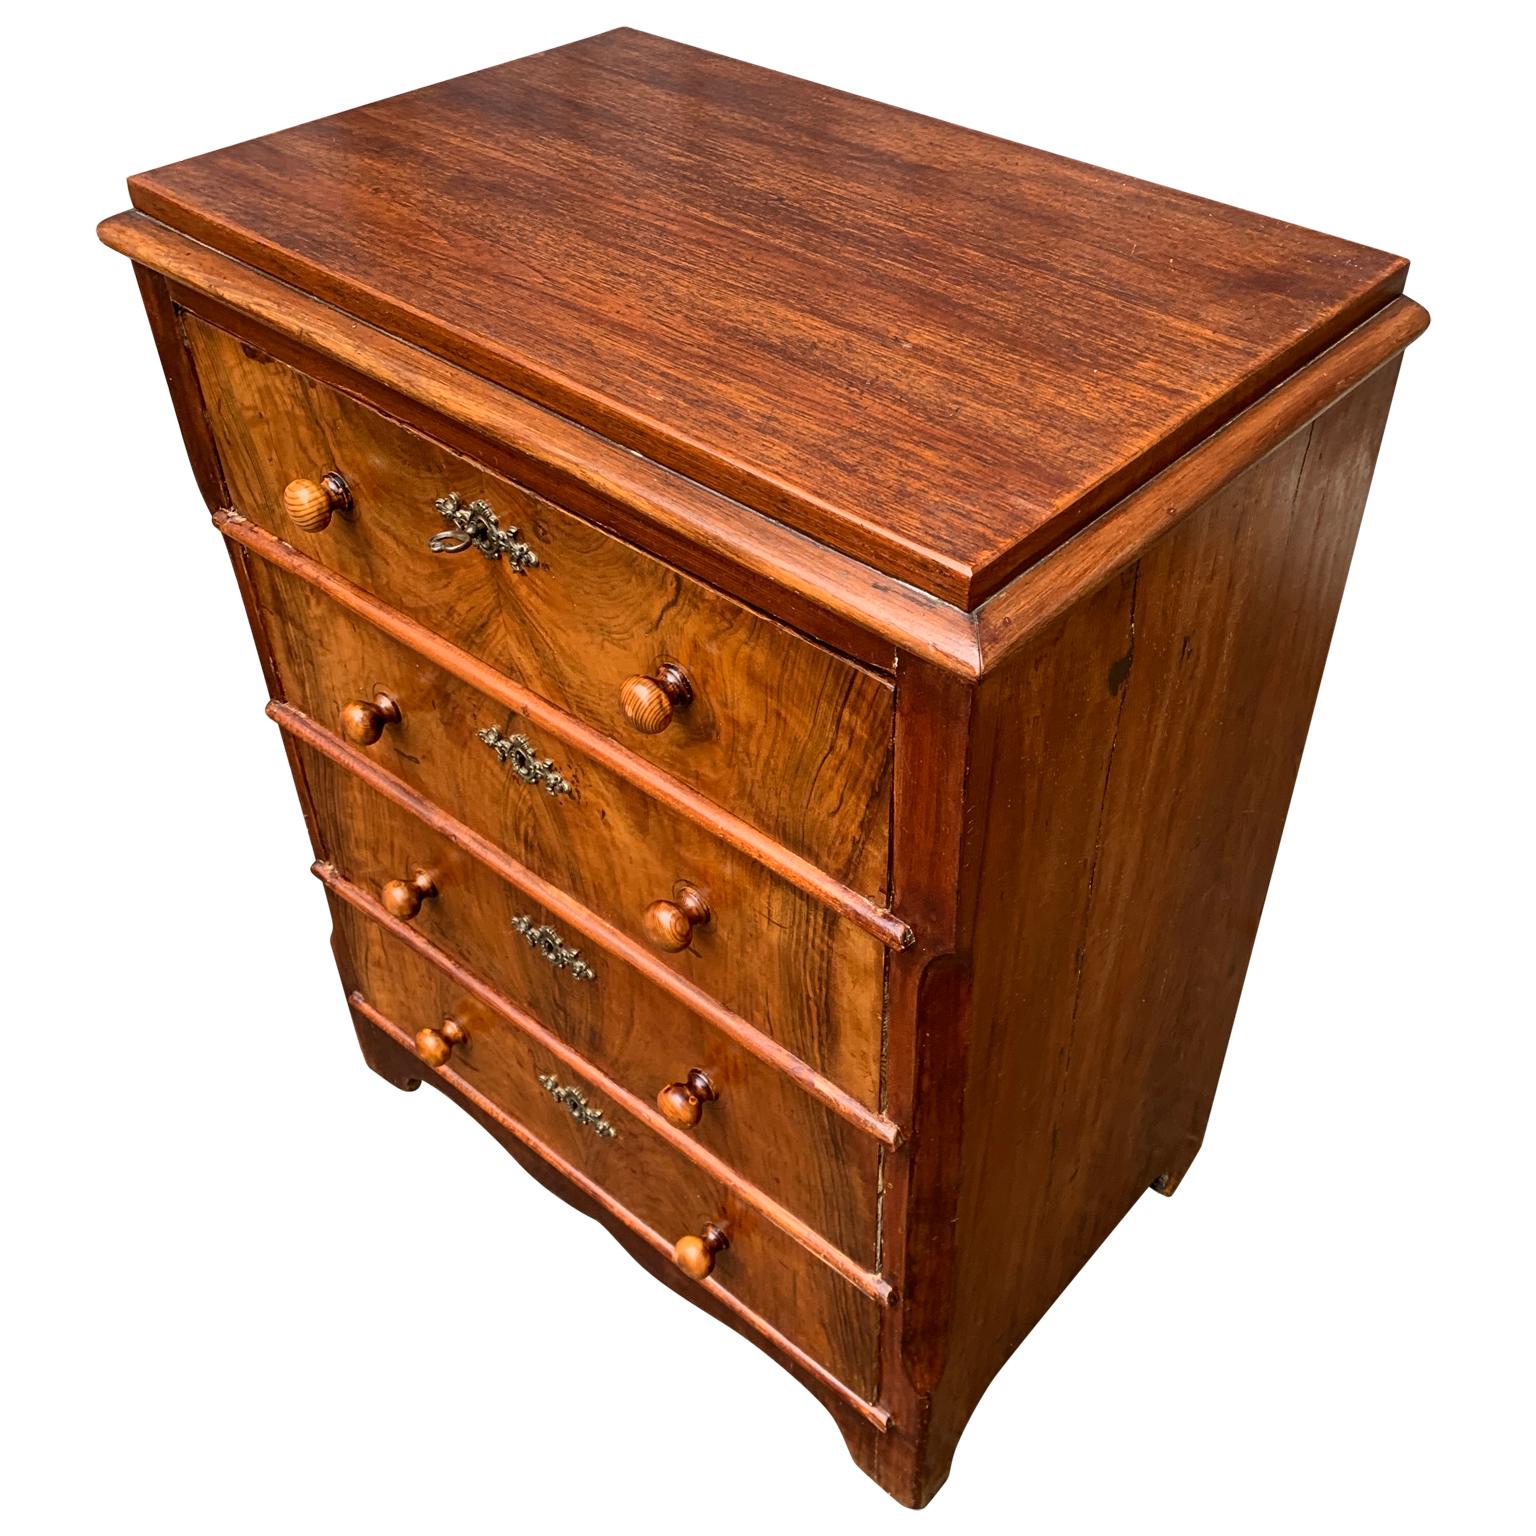 Hand-Crafted 19th Century Swedish Small Chest of Drawers Nightstand